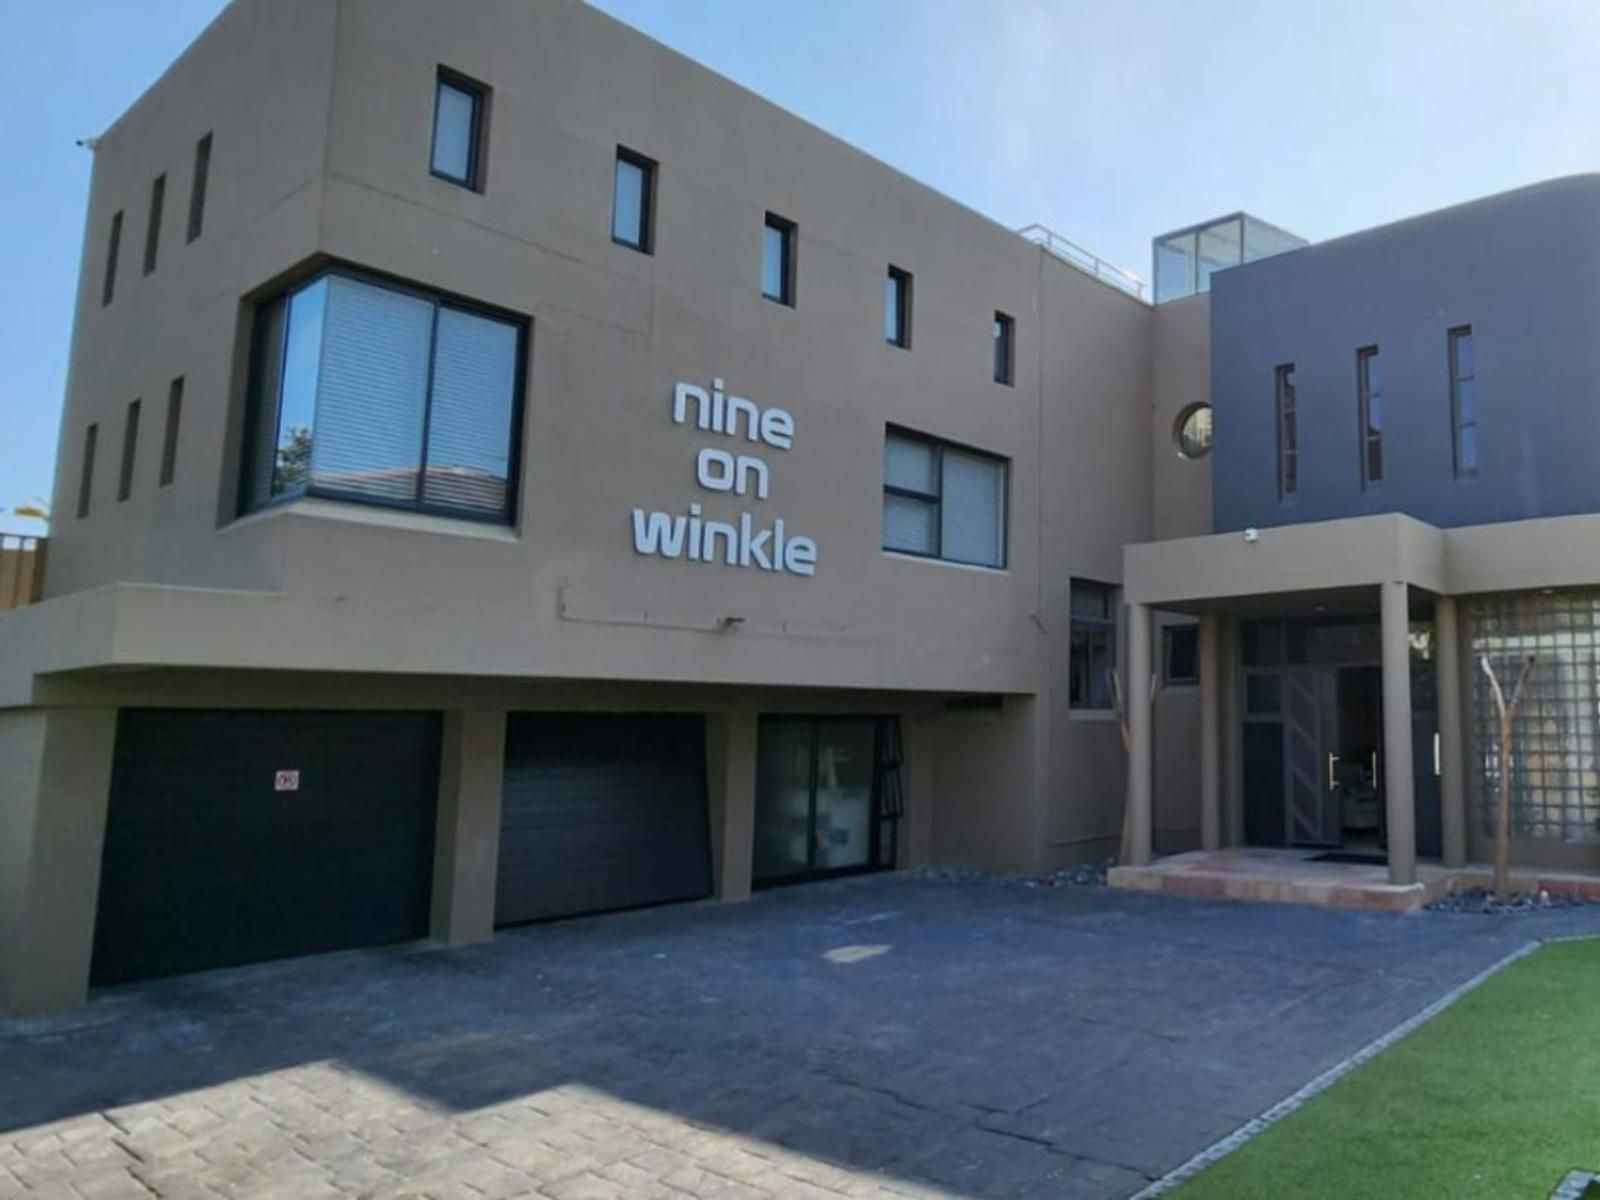 9 On Winkle Sunset Beach Cape Town Western Cape South Africa House, Building, Architecture, Window